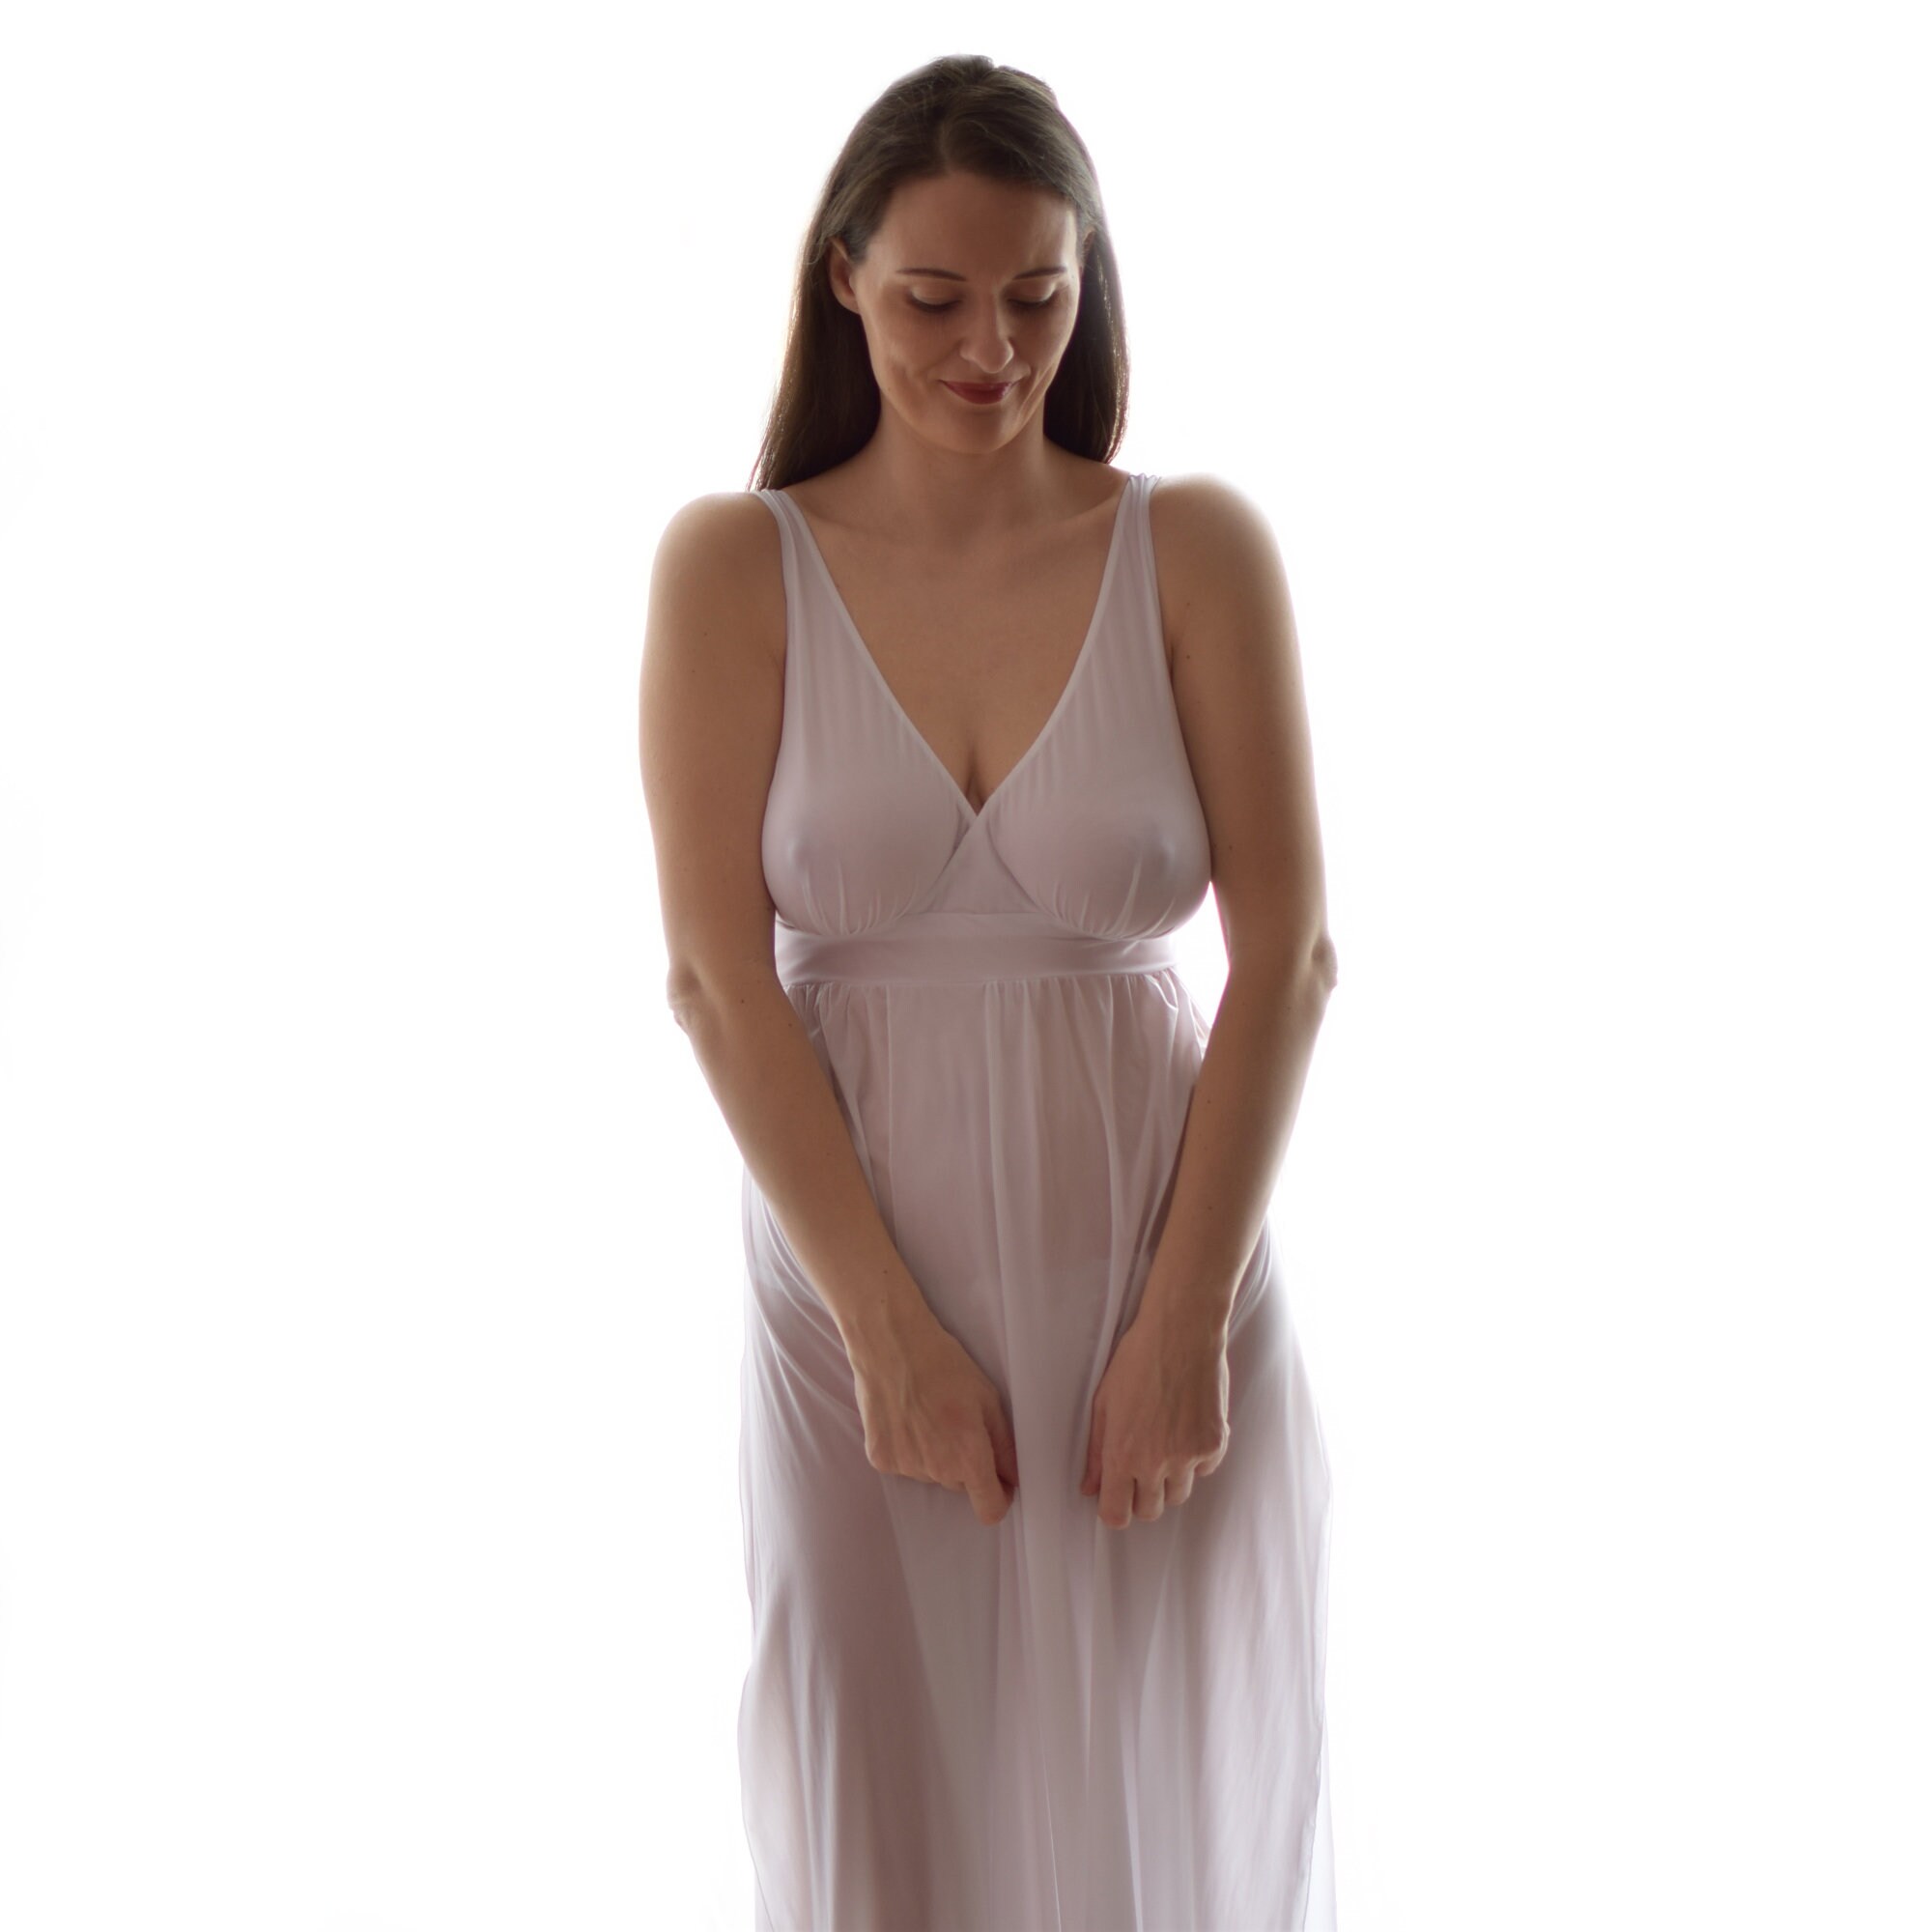 Women's see-through nightgowns